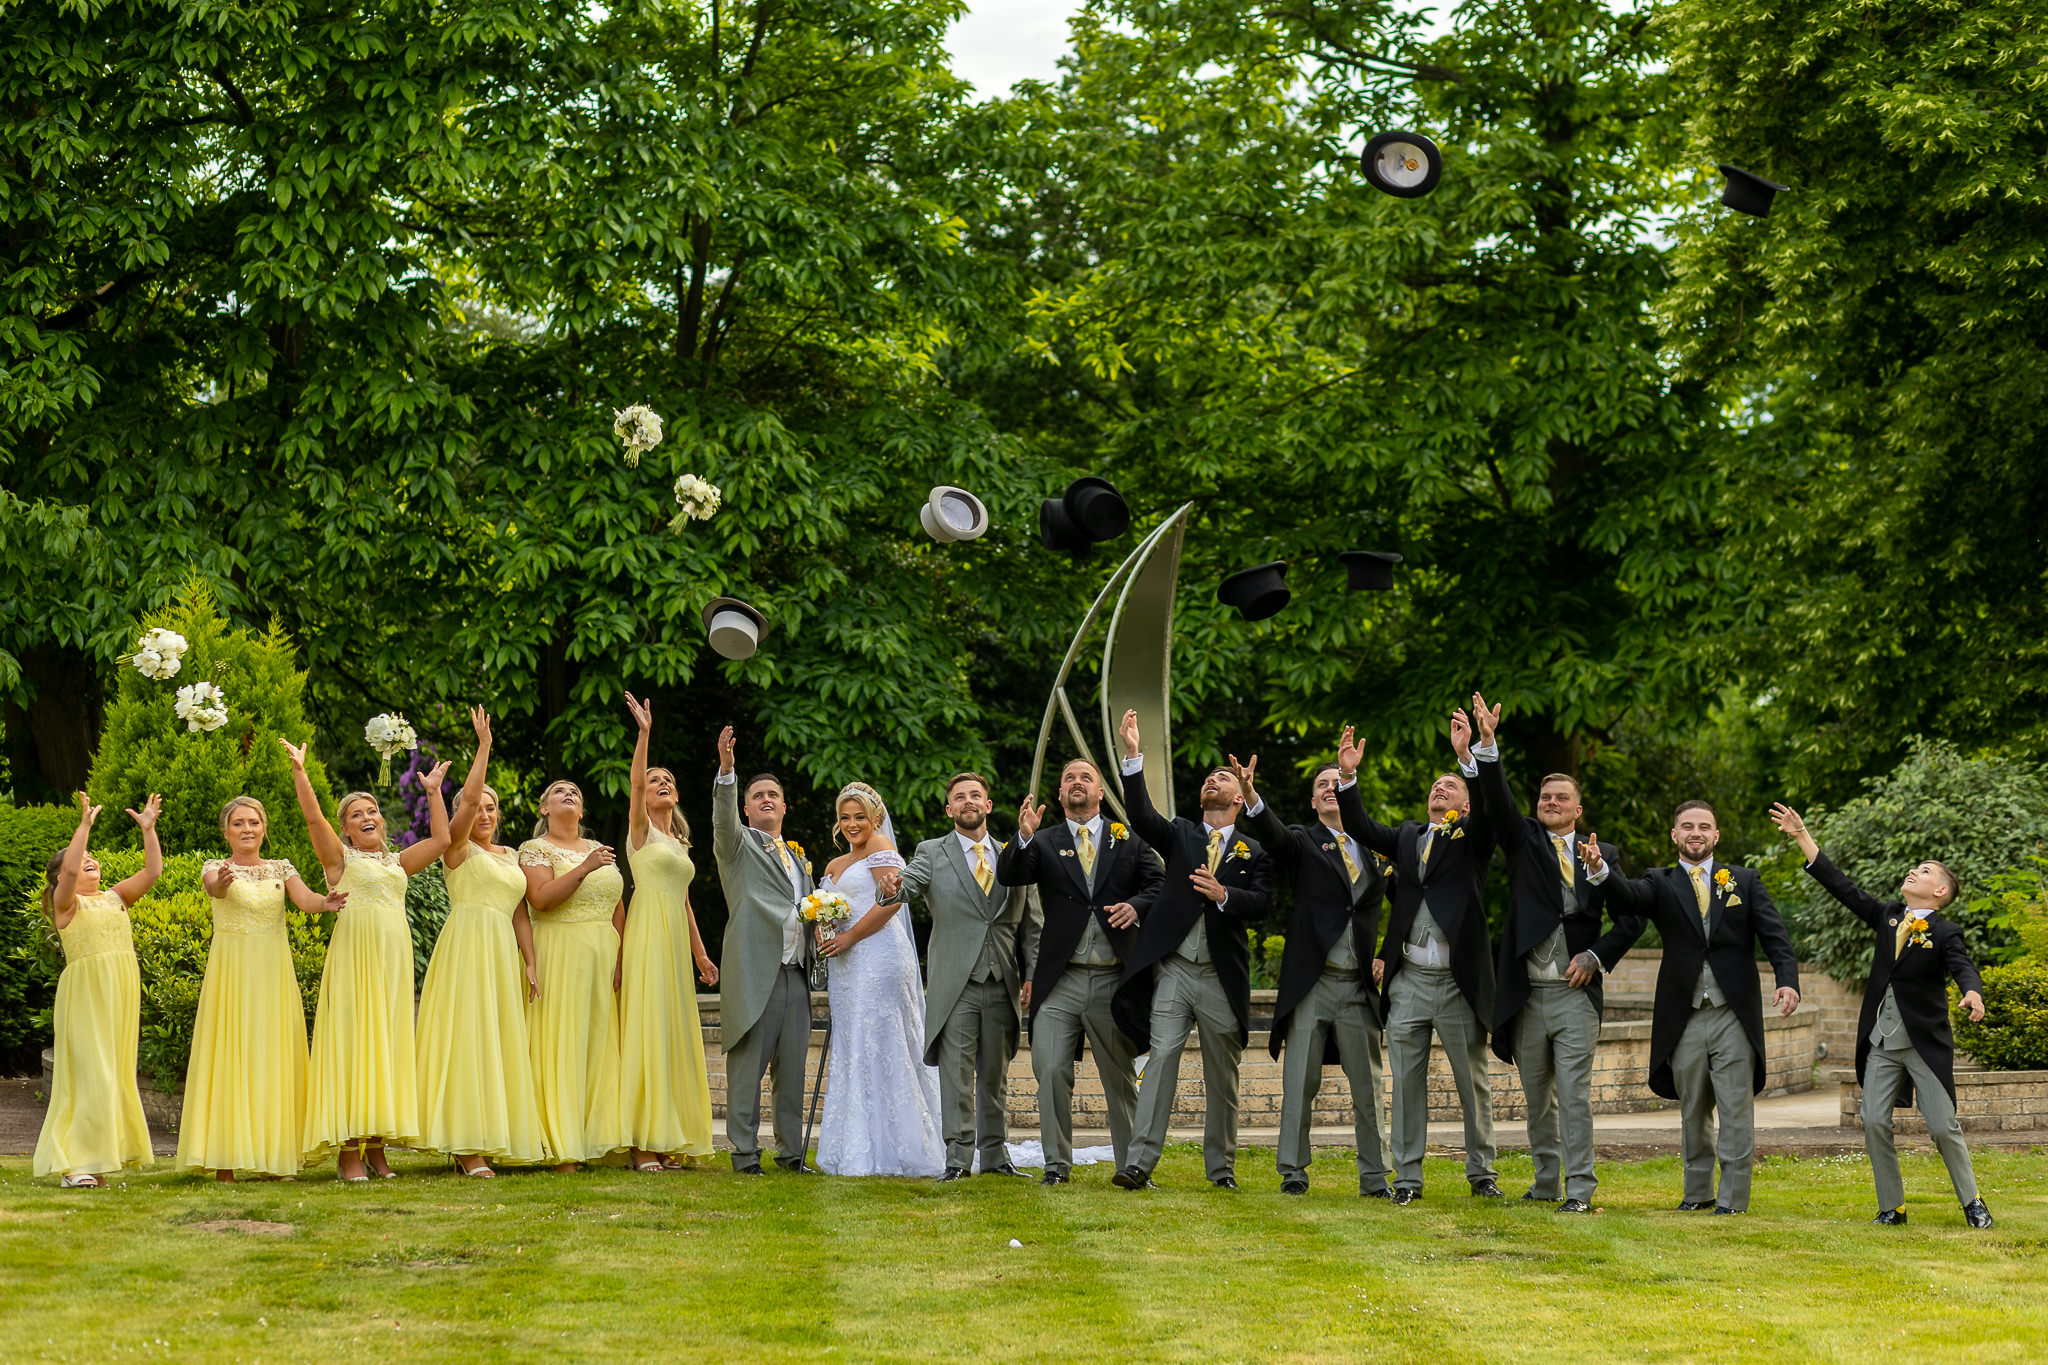 posed photo of the bridal party